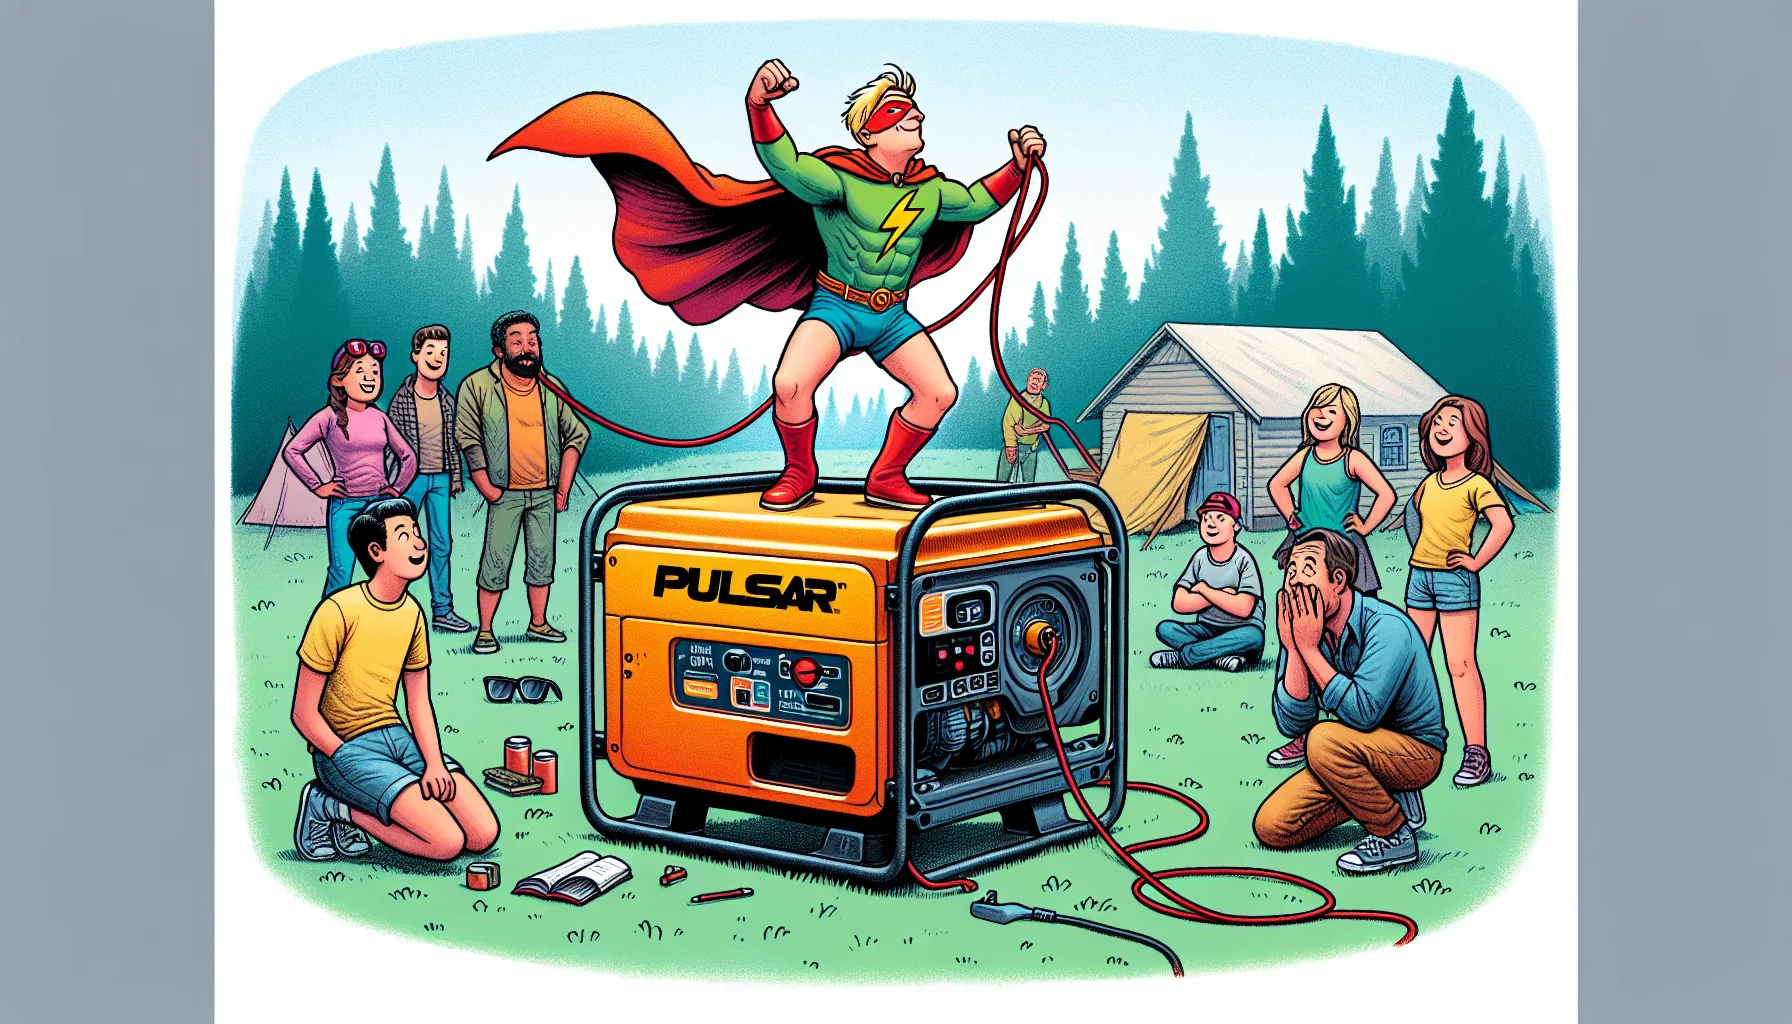 Illustrate a humorous scenario involving a Pulsar G12KBN generator. The generator is brightly colored, located in the center of a campground. A group of mixed-gender and racially diverse friends watches bemusedly as a blonde-haired Caucasian man in a superhero costume, complete with a red cape, bends over dramatically to operate the generator, attempting to 'charge up' his powers. This is done in a fun, light-hearted manner, showing the generator as a useful tool for power generation in a playful light, enticing viewers about the joy of generating electricity.